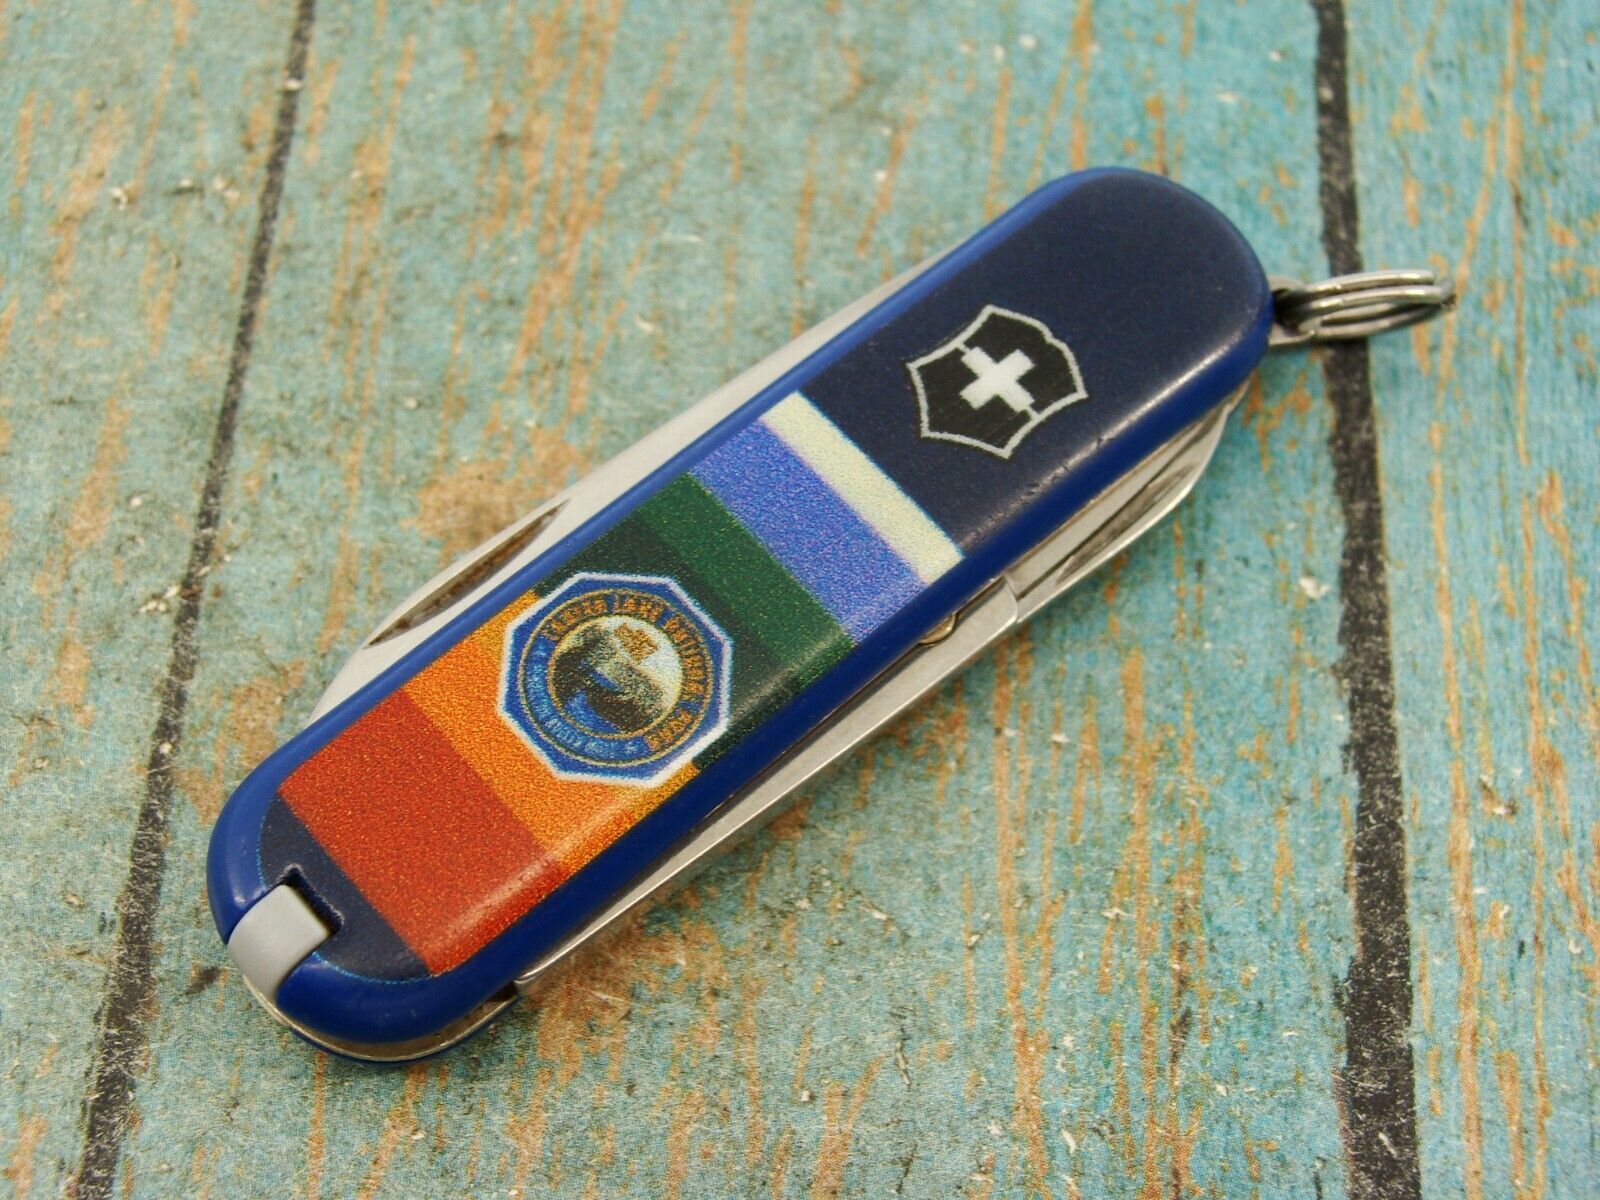 LIMITED VICTORINOX PENDLETON ADVERTISING CLASSIC SWISS ARMY POCKET KNIFE KNIVES